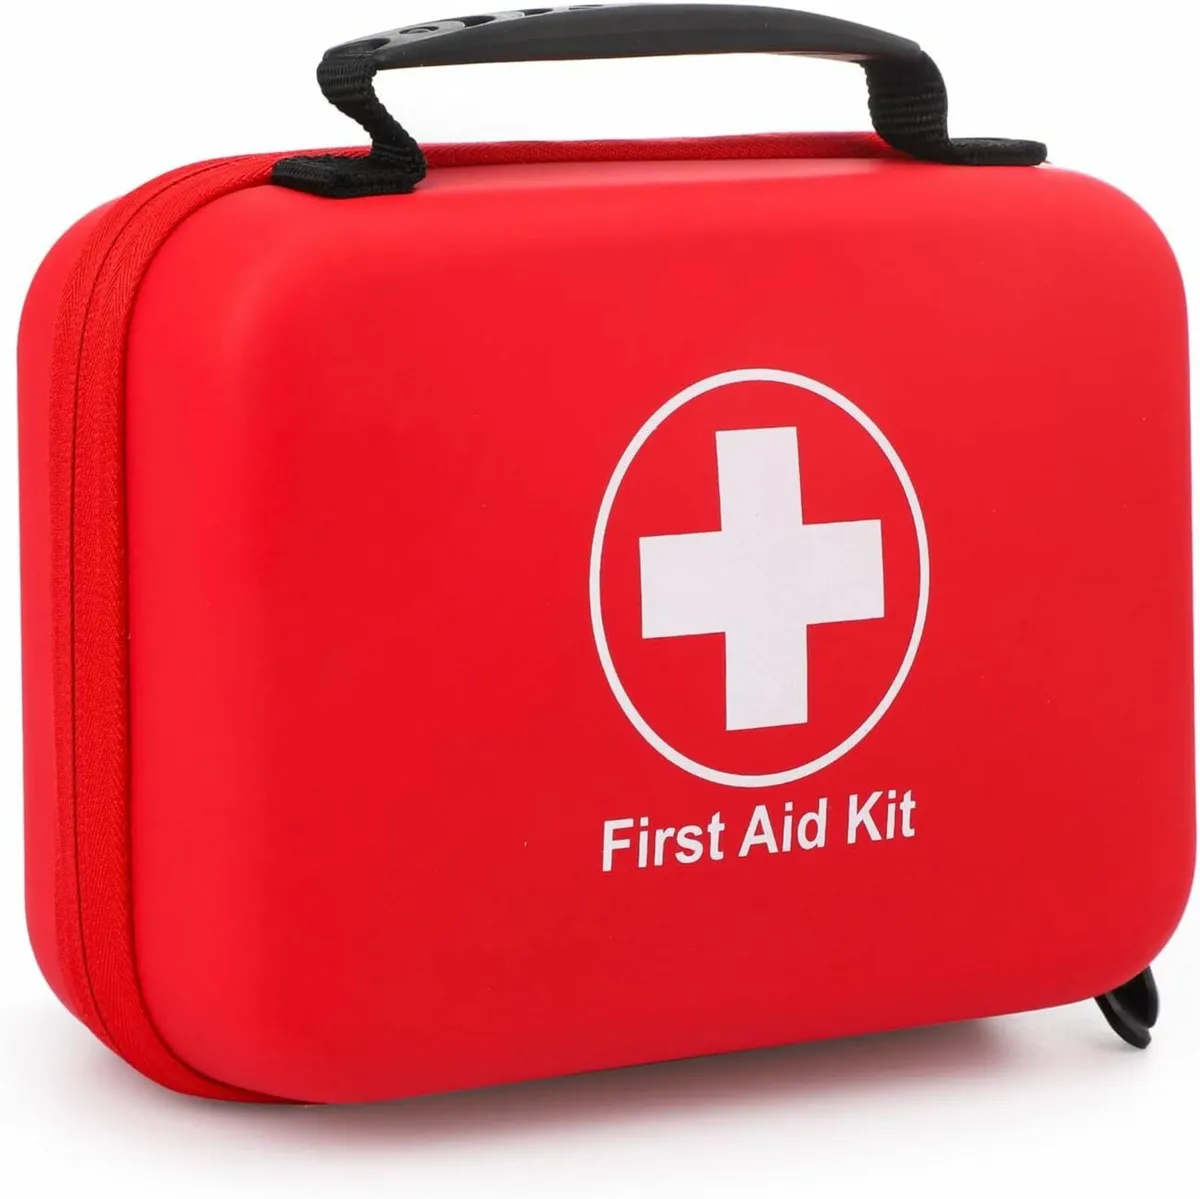 Extra Large First Aid Kit